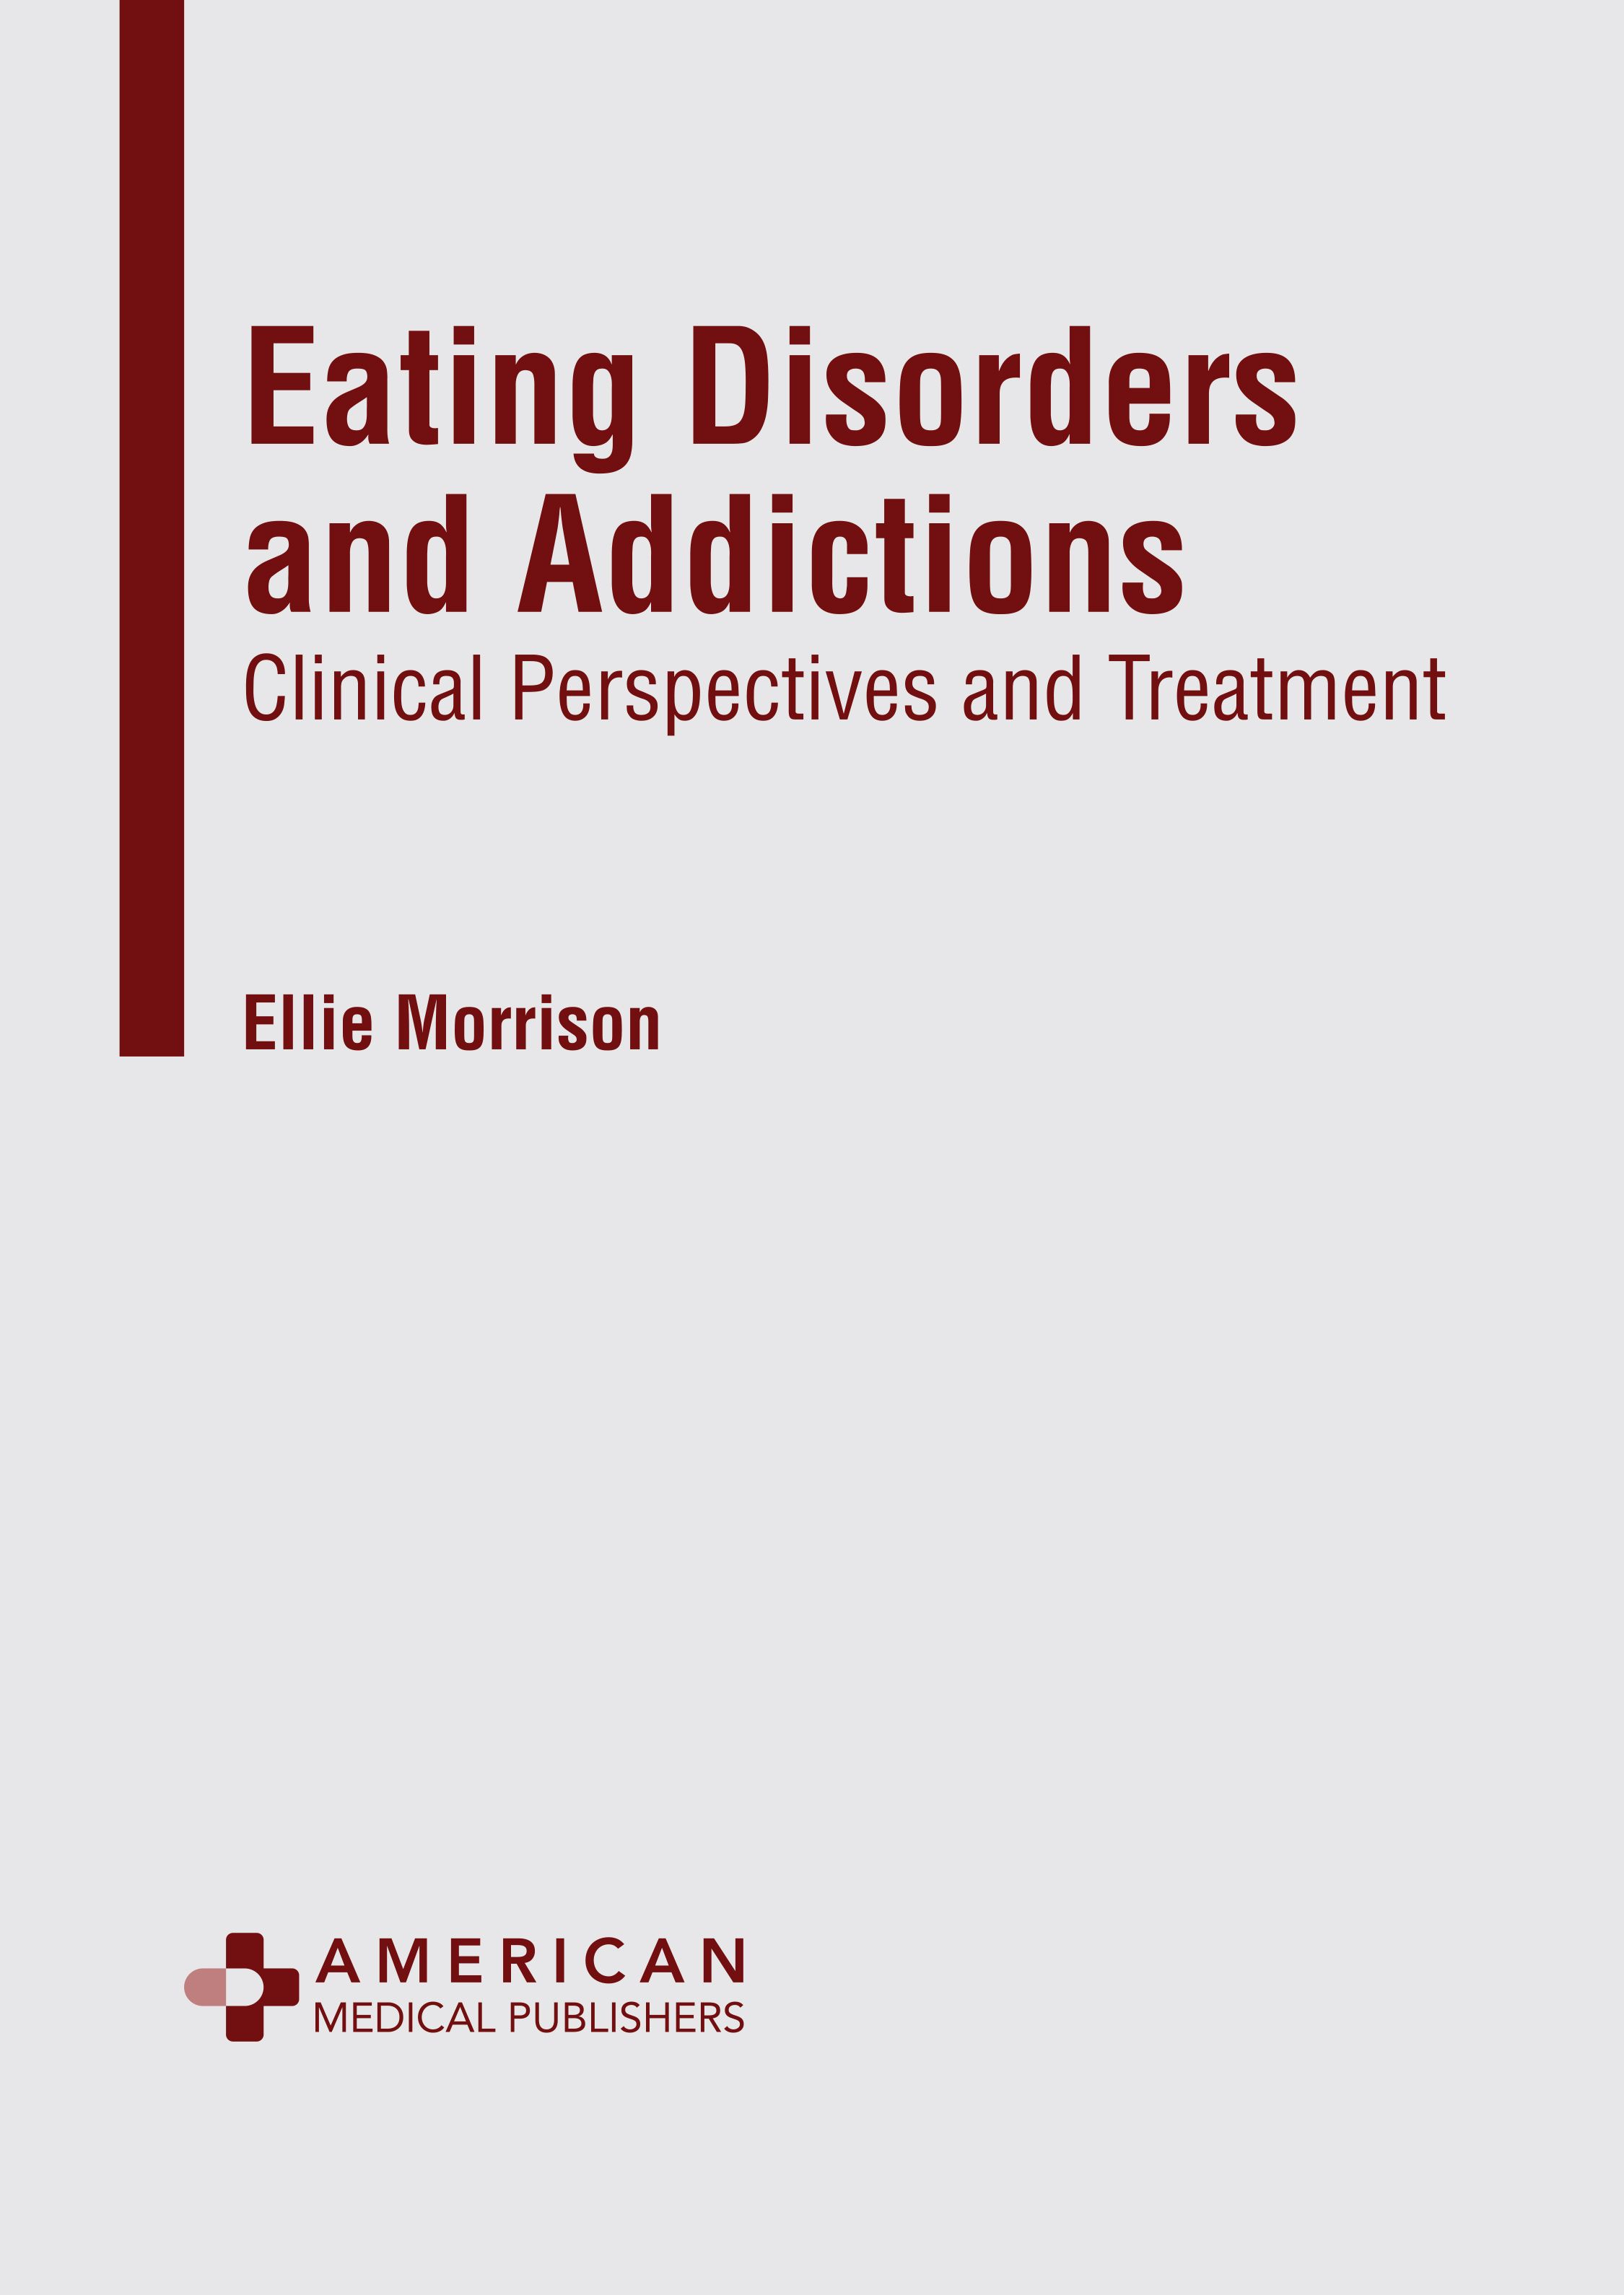 EATING DISORDERS AND ADDICTIONS: CLINICAL PERSPECTIVES AND TREATMENT